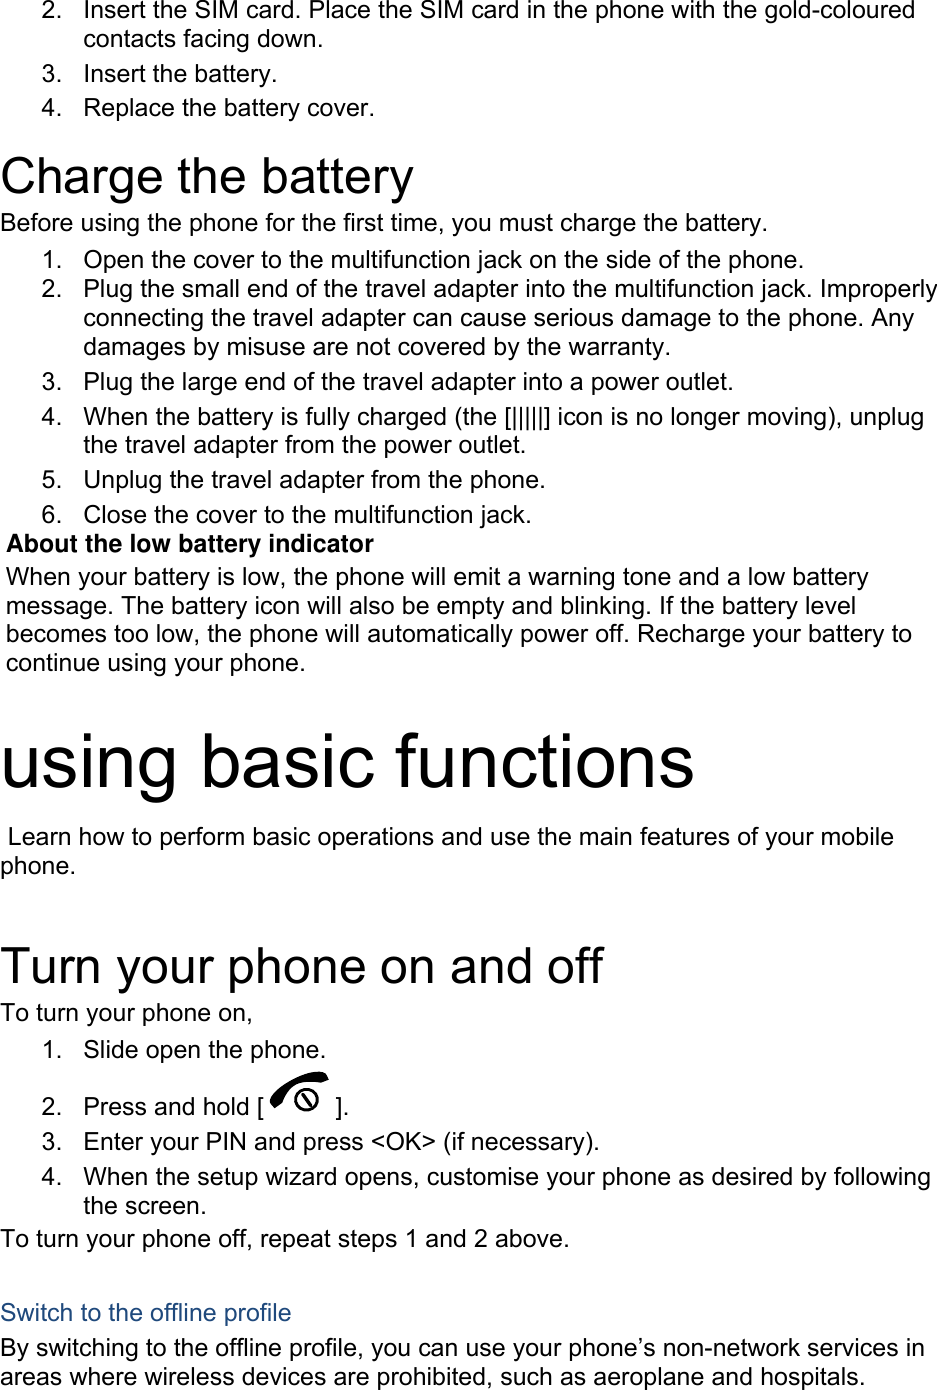 2.  Insert the SIM card. Place the SIM card in the phone with the gold-coloured contacts facing down. 3. Insert the battery. 4.  Replace the battery cover.  Charge the battery Before using the phone for the first time, you must charge the battery. 1.  Open the cover to the multifunction jack on the side of the phone. 2.  Plug the small end of the travel adapter into the multifunction jack. Improperly connecting the travel adapter can cause serious damage to the phone. Any damages by misuse are not covered by the warranty. 3.  Plug the large end of the travel adapter into a power outlet. 4.  When the battery is fully charged (the [|||||] icon is no longer moving), unplug the travel adapter from the power outlet. 5.  Unplug the travel adapter from the phone. 6.  Close the cover to the multifunction jack. About the low battery indicator When your battery is low, the phone will emit a warning tone and a low battery message. The battery icon will also be empty and blinking. If the battery level becomes too low, the phone will automatically power off. Recharge your battery to continue using your phone.  using basic functions  Learn how to perform basic operations and use the main features of your mobile phone.   Turn your phone on and off To turn your phone on, 1.  Slide open the phone. 2.  Press and hold [ ]. 3.  Enter your PIN and press &lt;OK&gt; (if necessary). 4.  When the setup wizard opens, customise your phone as desired by following the screen. To turn your phone off, repeat steps 1 and 2 above.  Switch to the offline profile By switching to the offline profile, you can use your phone’s non-network services in areas where wireless devices are prohibited, such as aeroplane and hospitals. 